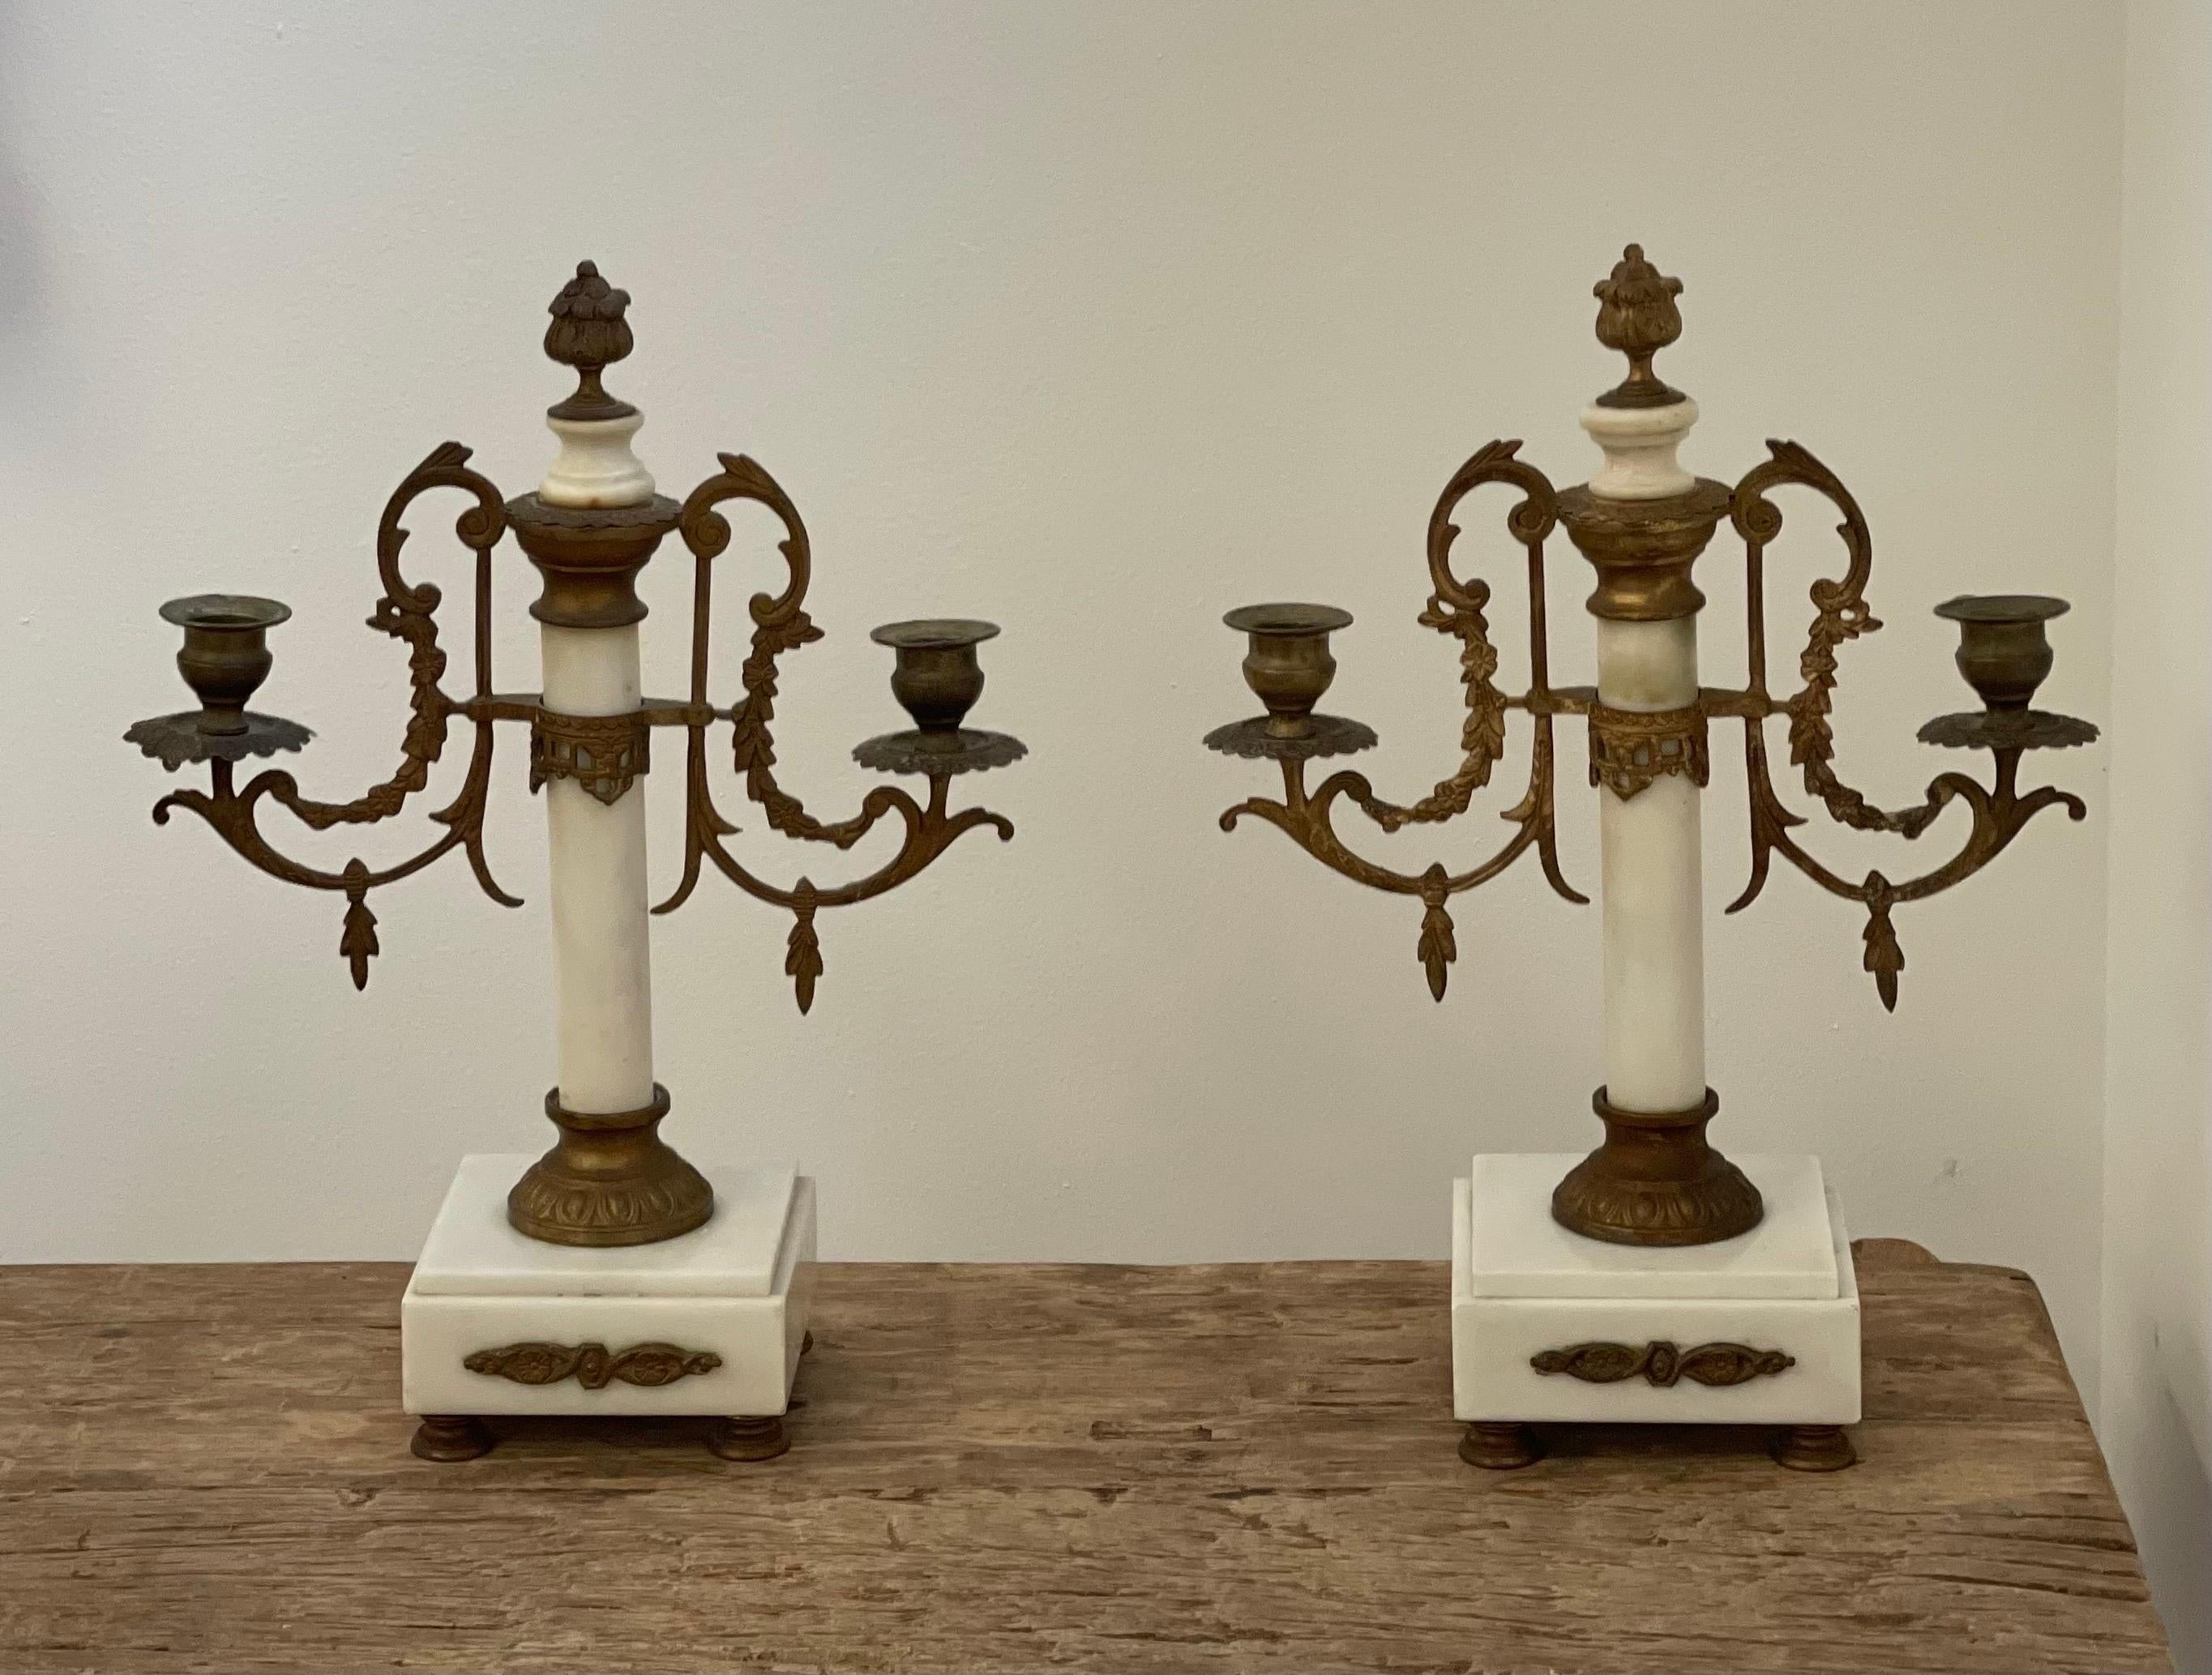 Pair of Louis XVI Style 19th century gilt-bronze and gilt-metal and marble candelabra.

Dimensions: 11W, 4D, 13H.